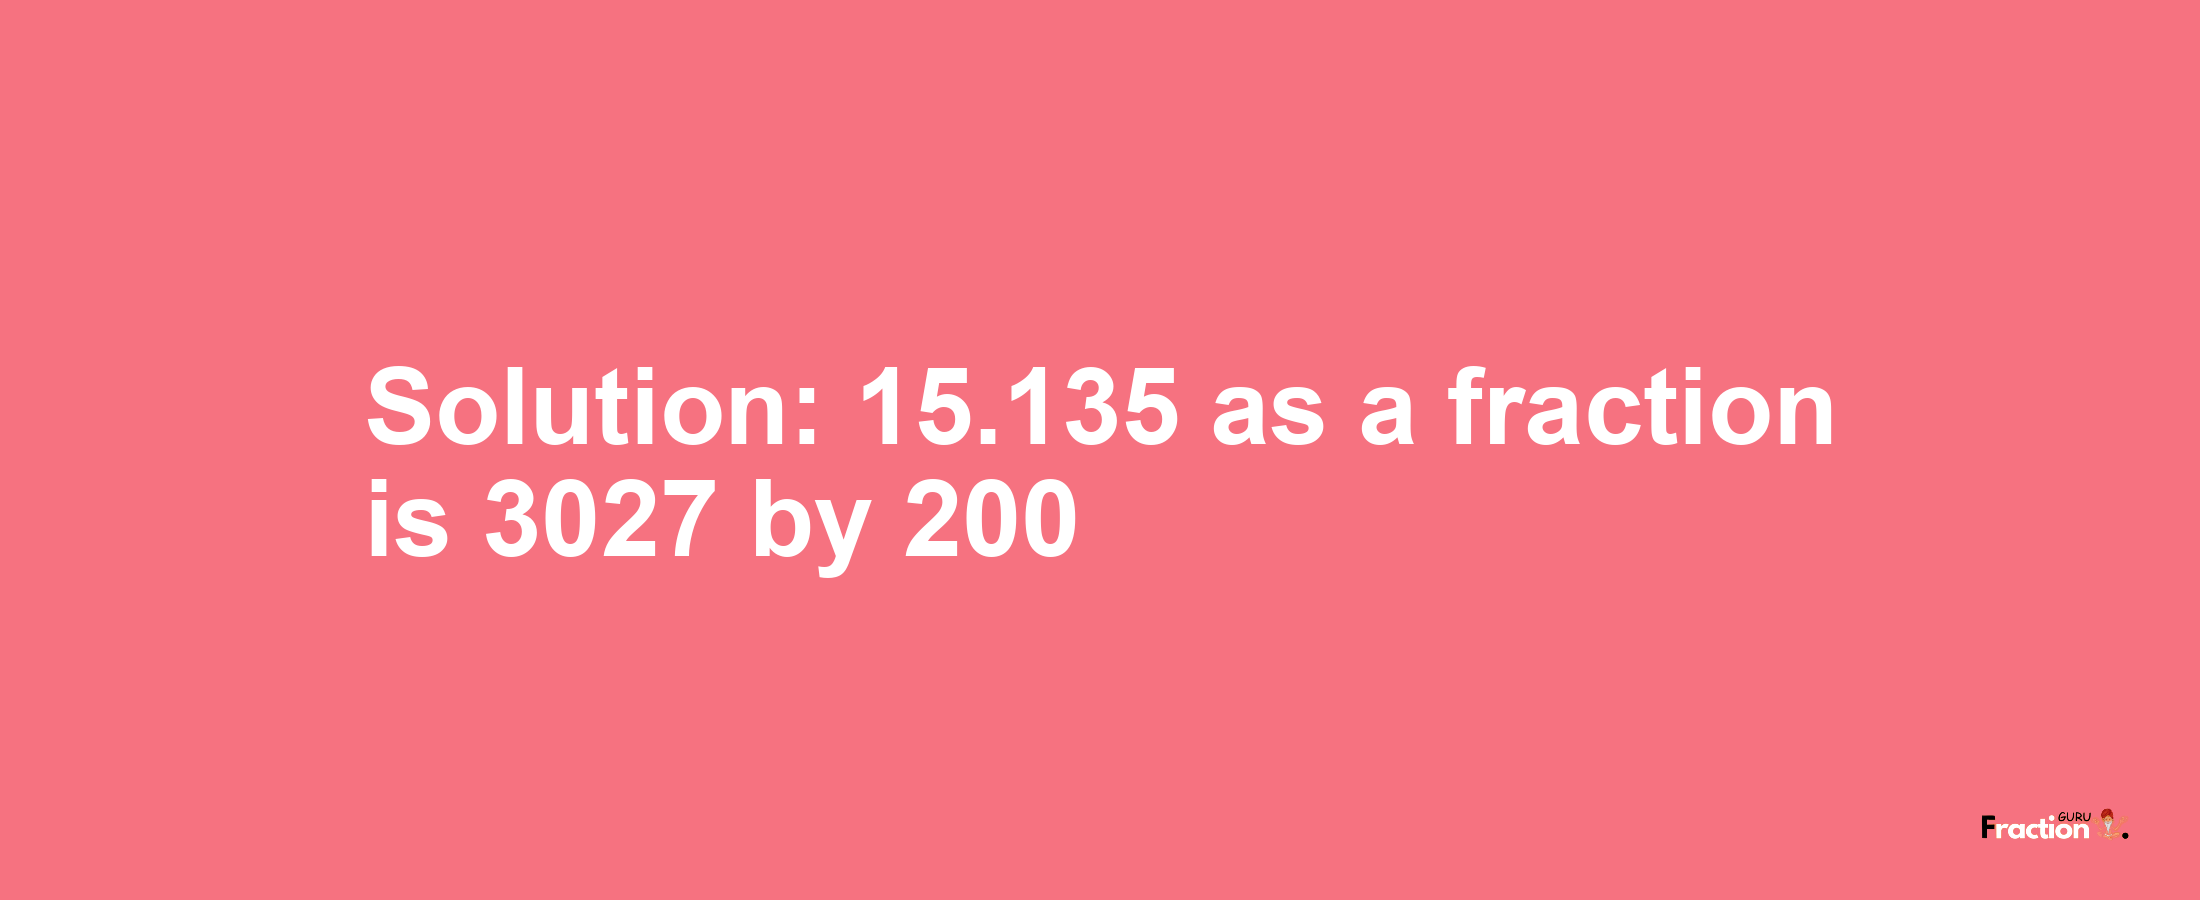 Solution:15.135 as a fraction is 3027/200